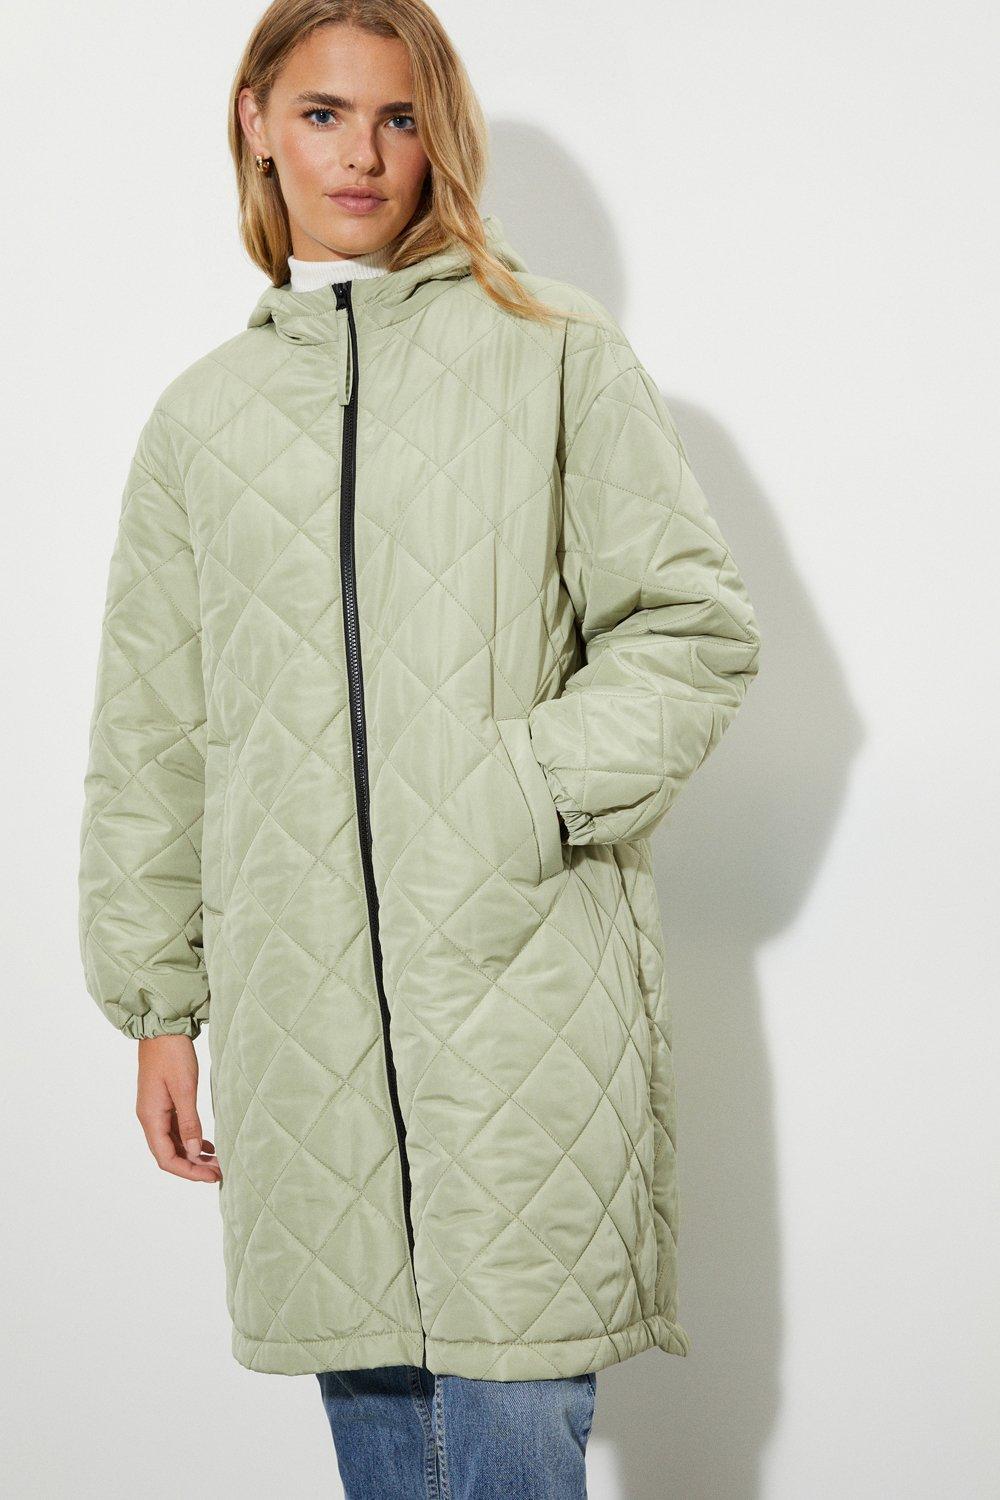 Womens Oversized Hooded Diamond Quilted Parka Coat